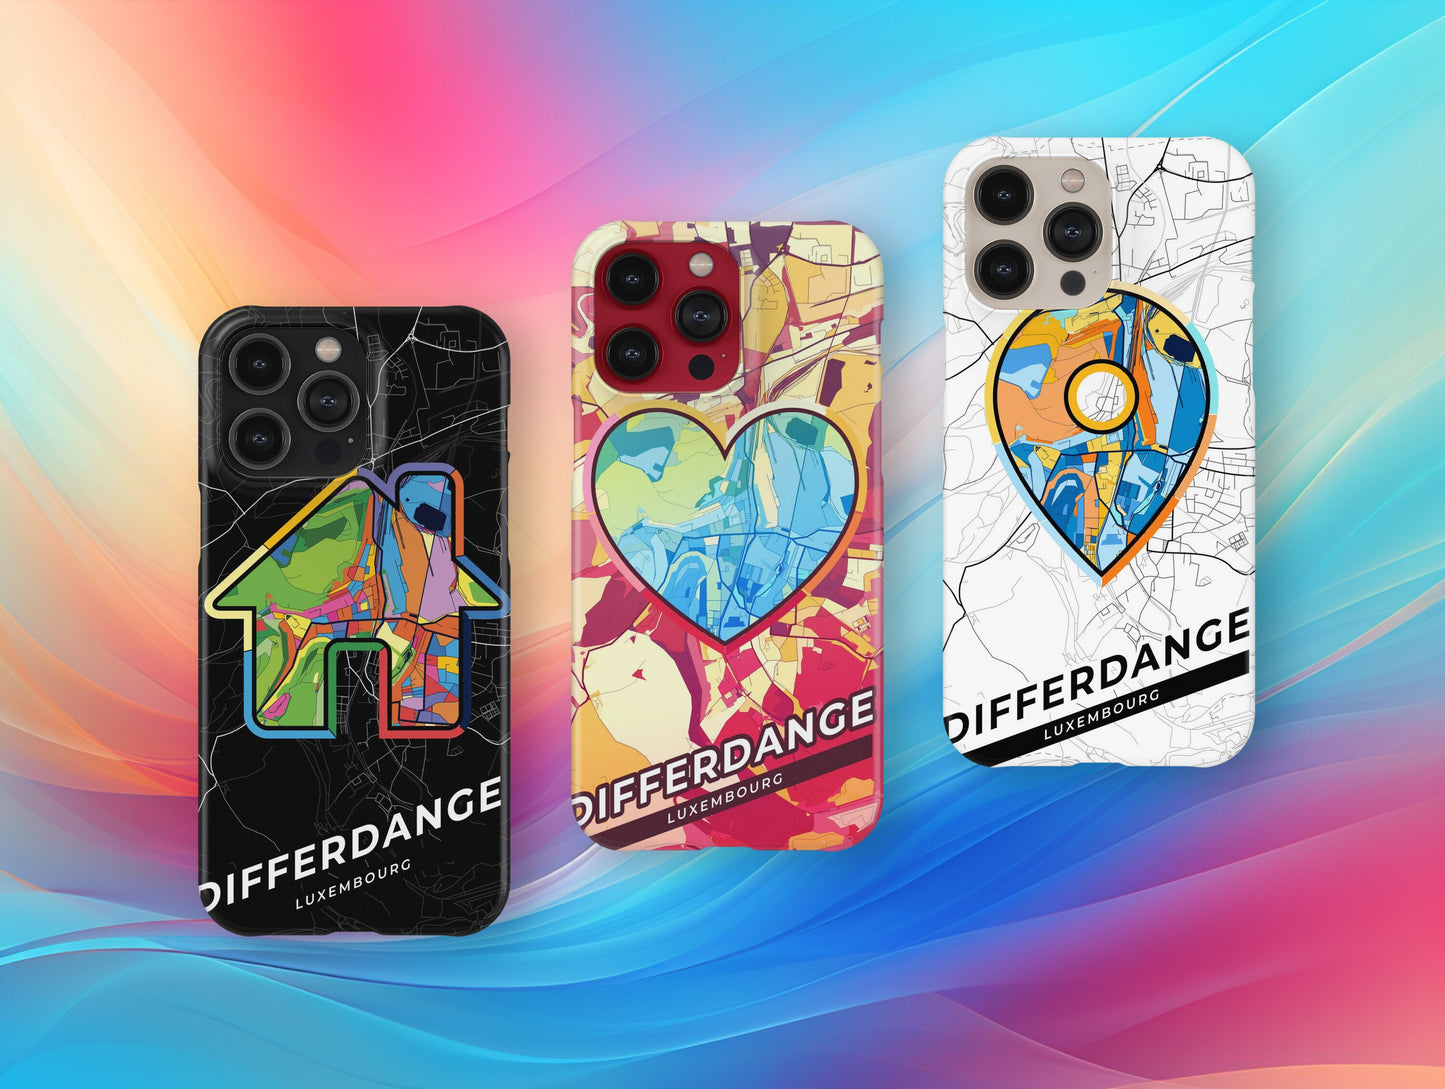 Differdange Luxembourg slim phone case with colorful icon. Birthday, wedding or housewarming gift. Couple match cases.